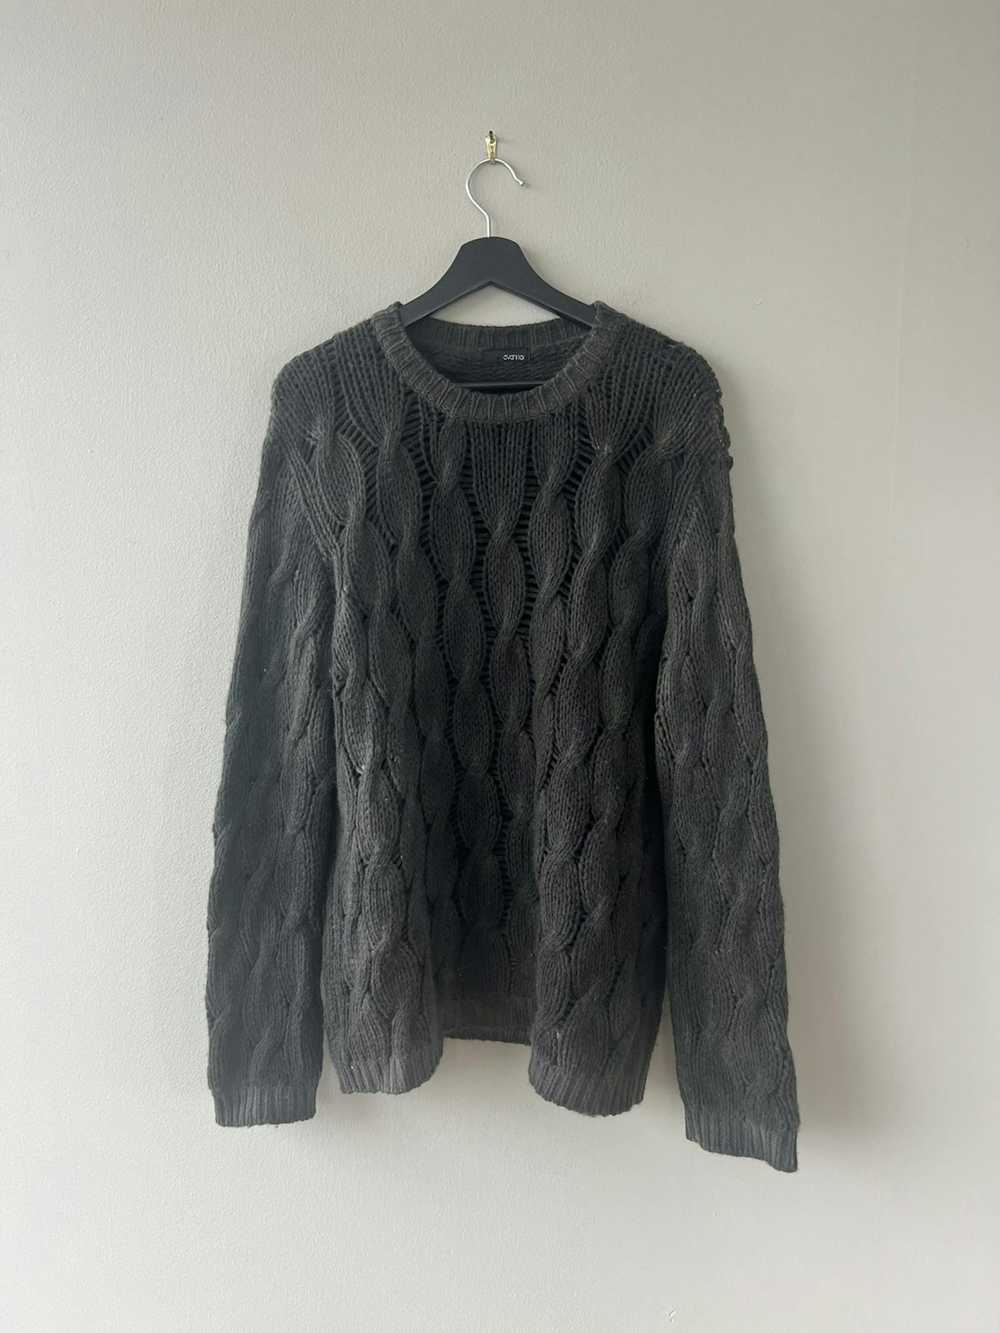 Avant Toi Cashmere Cable Knit Sweater - image 1